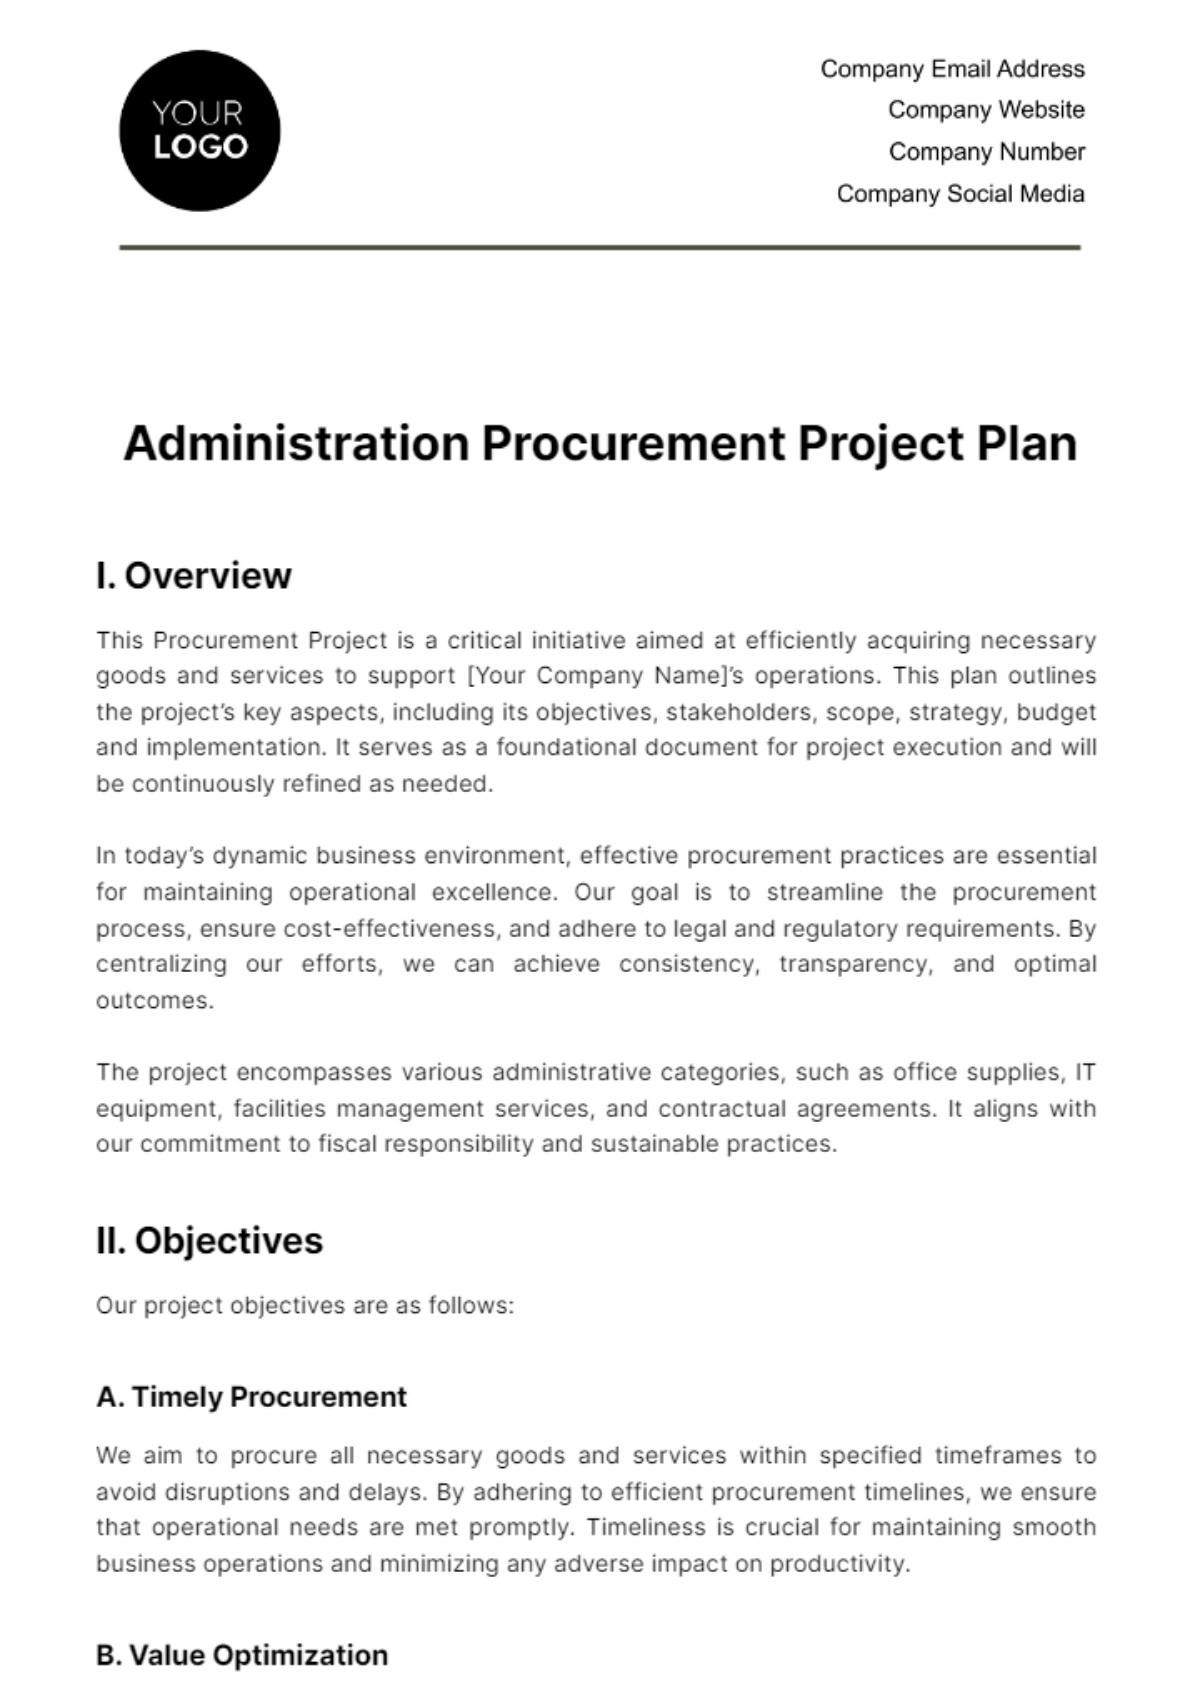 Free Administration Procurement Project Plan Template